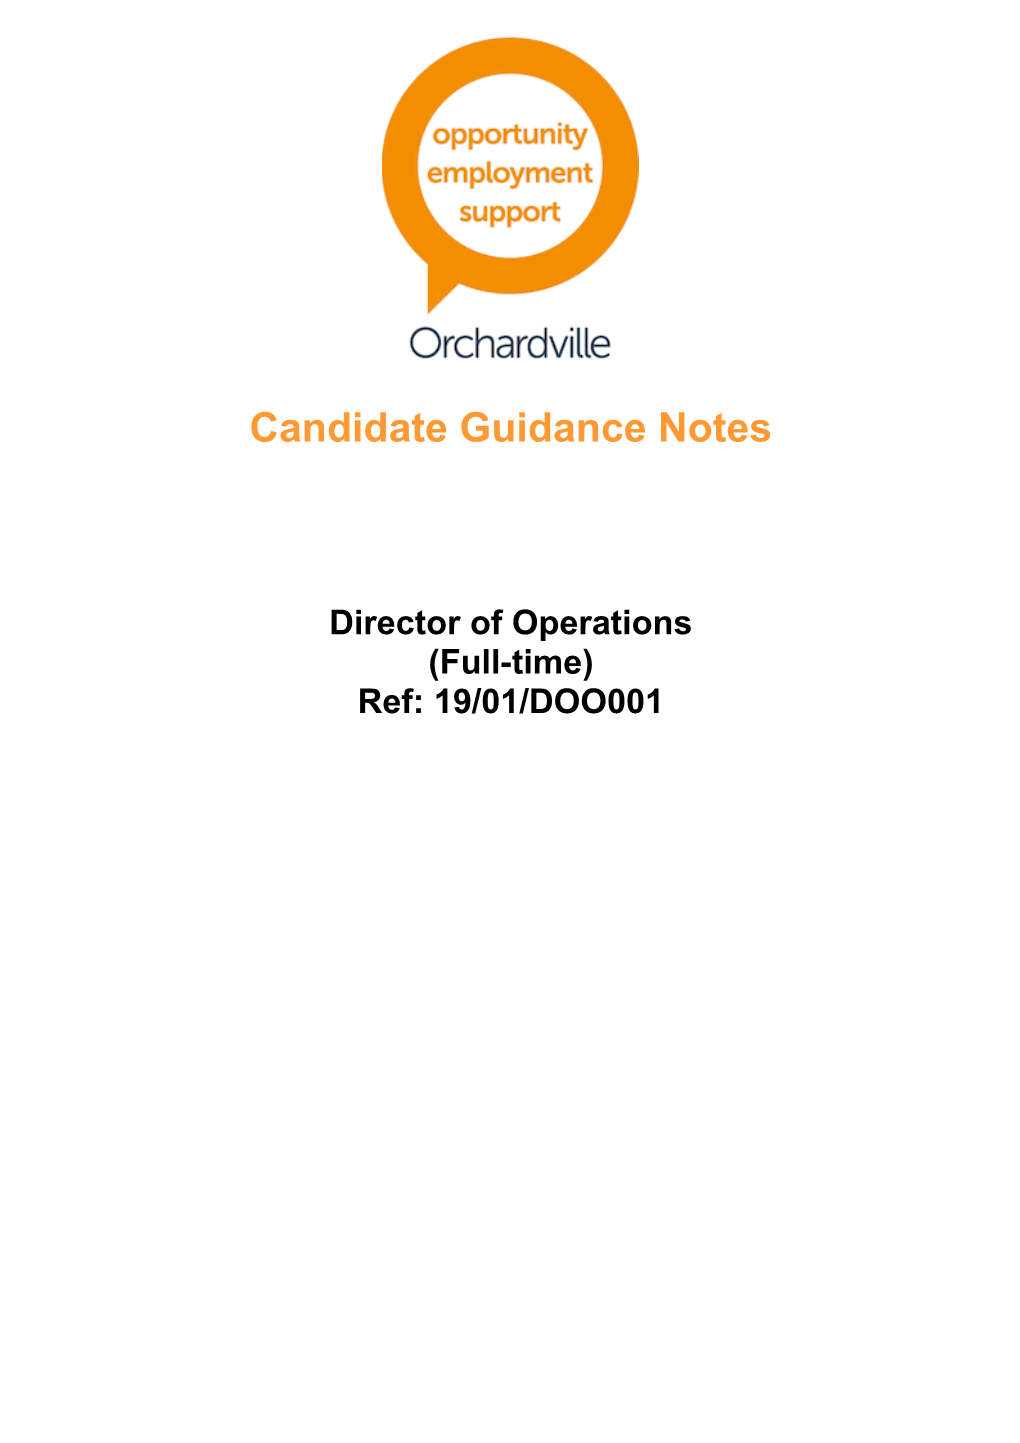 Candidate Guidance Notes